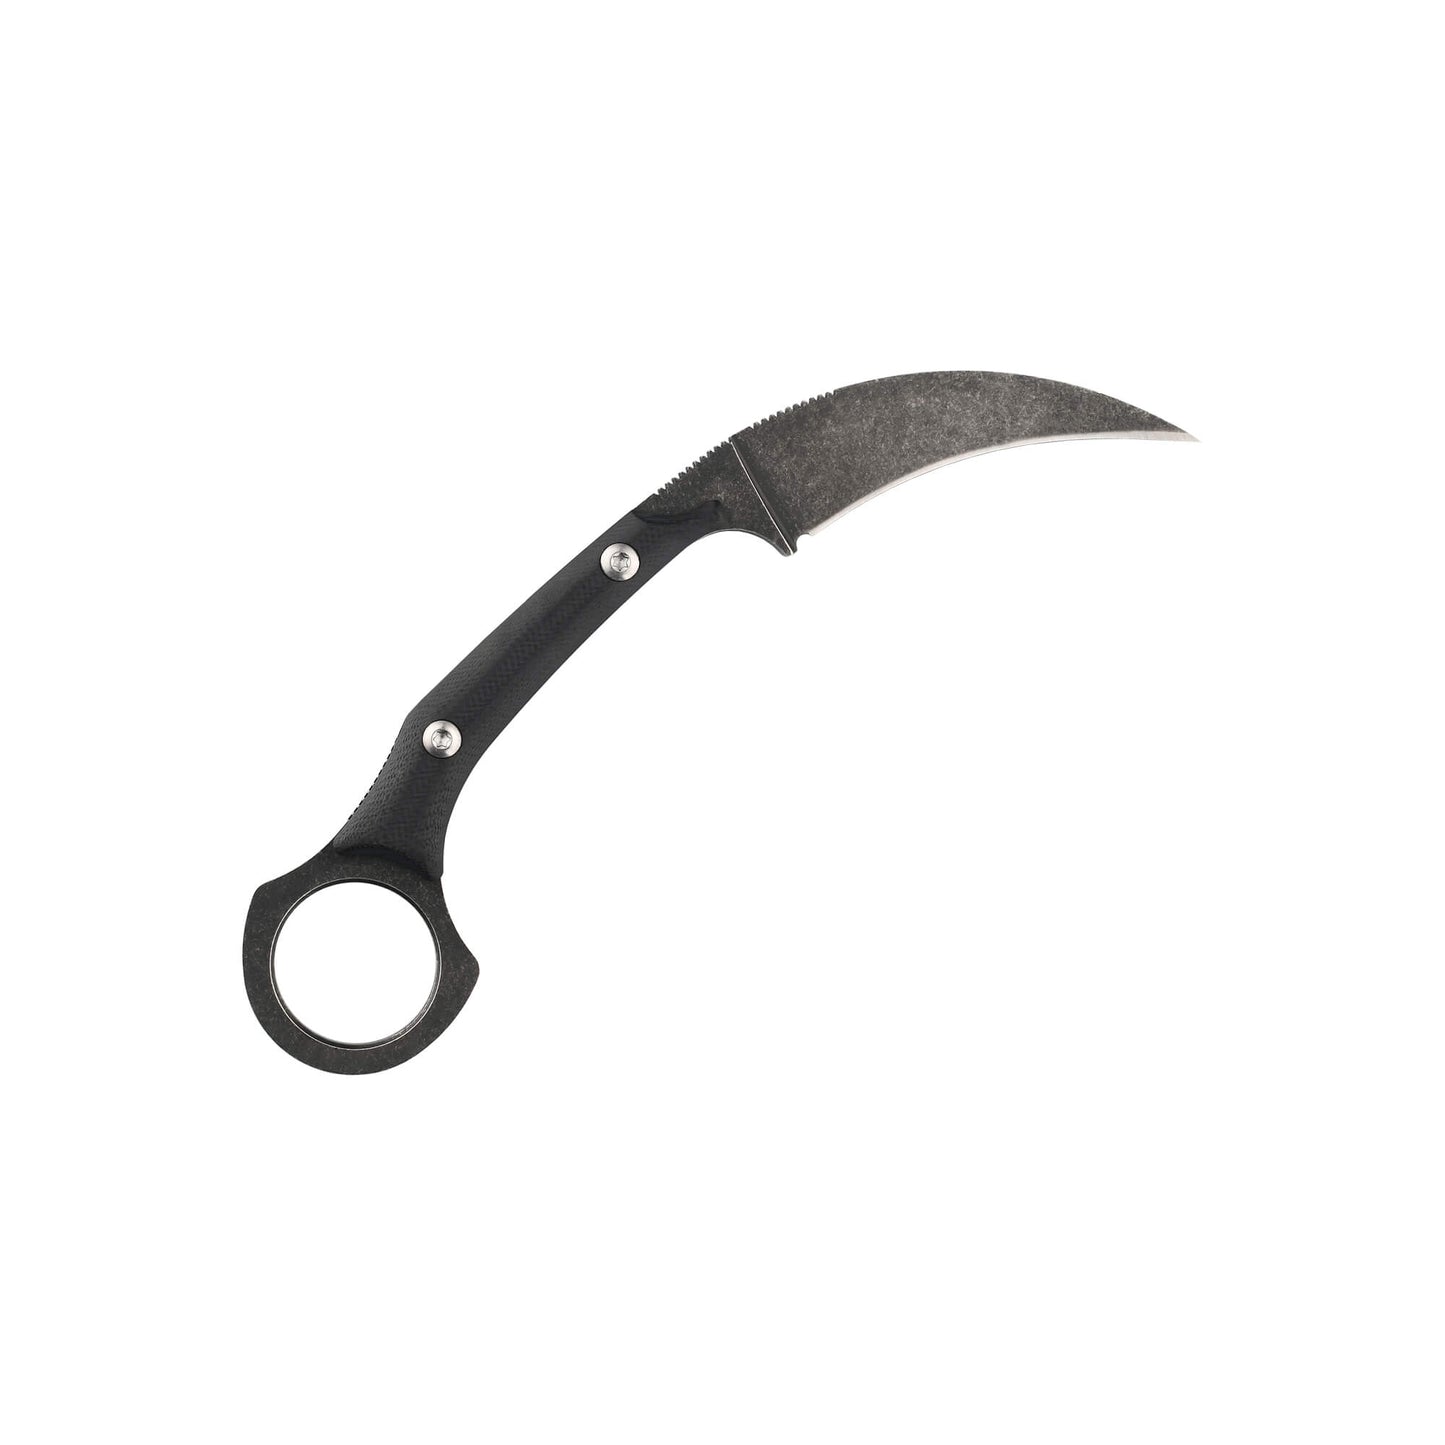 Black fixed-blade knife Sigurd from Mavik Gear made of 7Cr13 Steel and G10 for secure grip, with talon blade. 